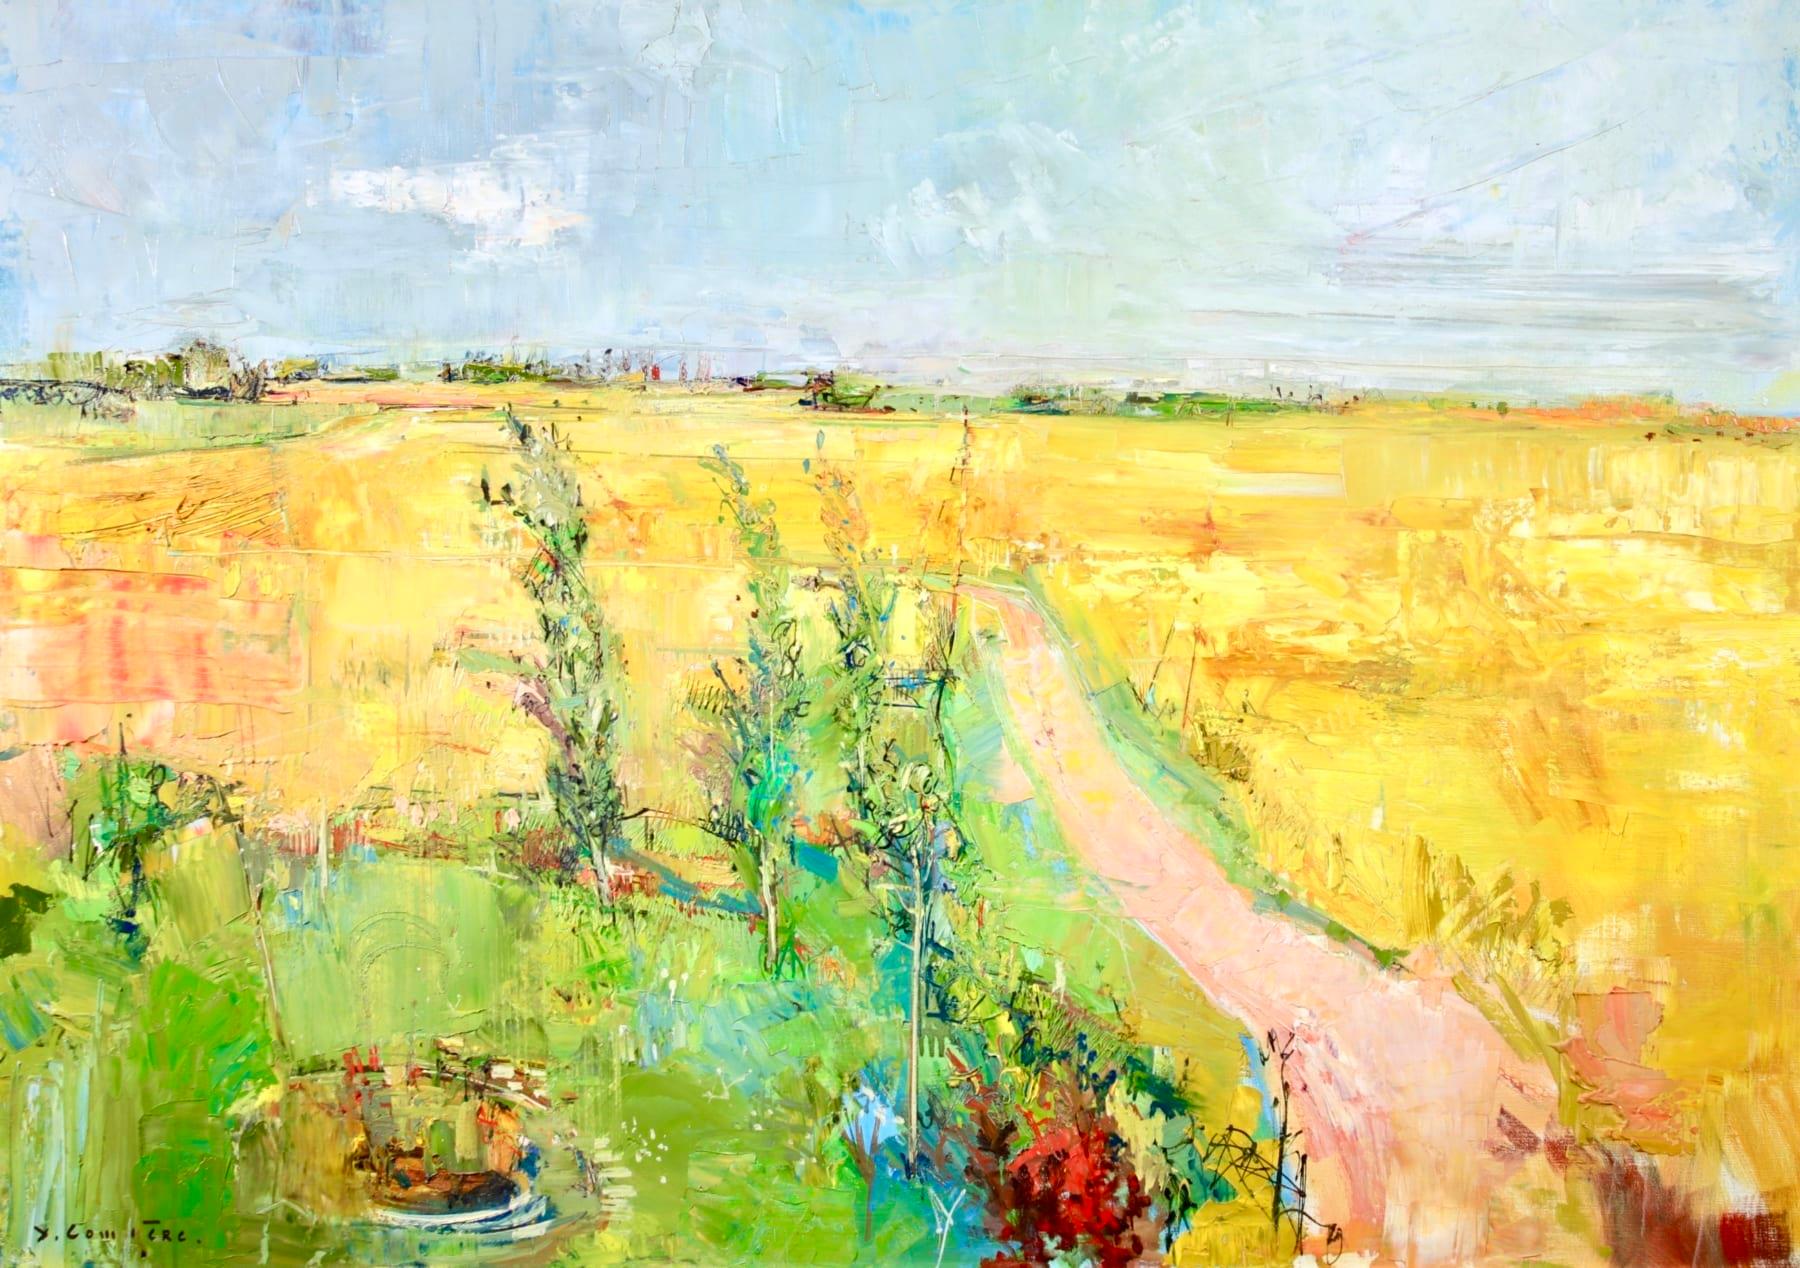 Paysage - Post Impressionist Oil, Summer Landscape by Jean Yves Commere - Painting by Jean Yves Commère